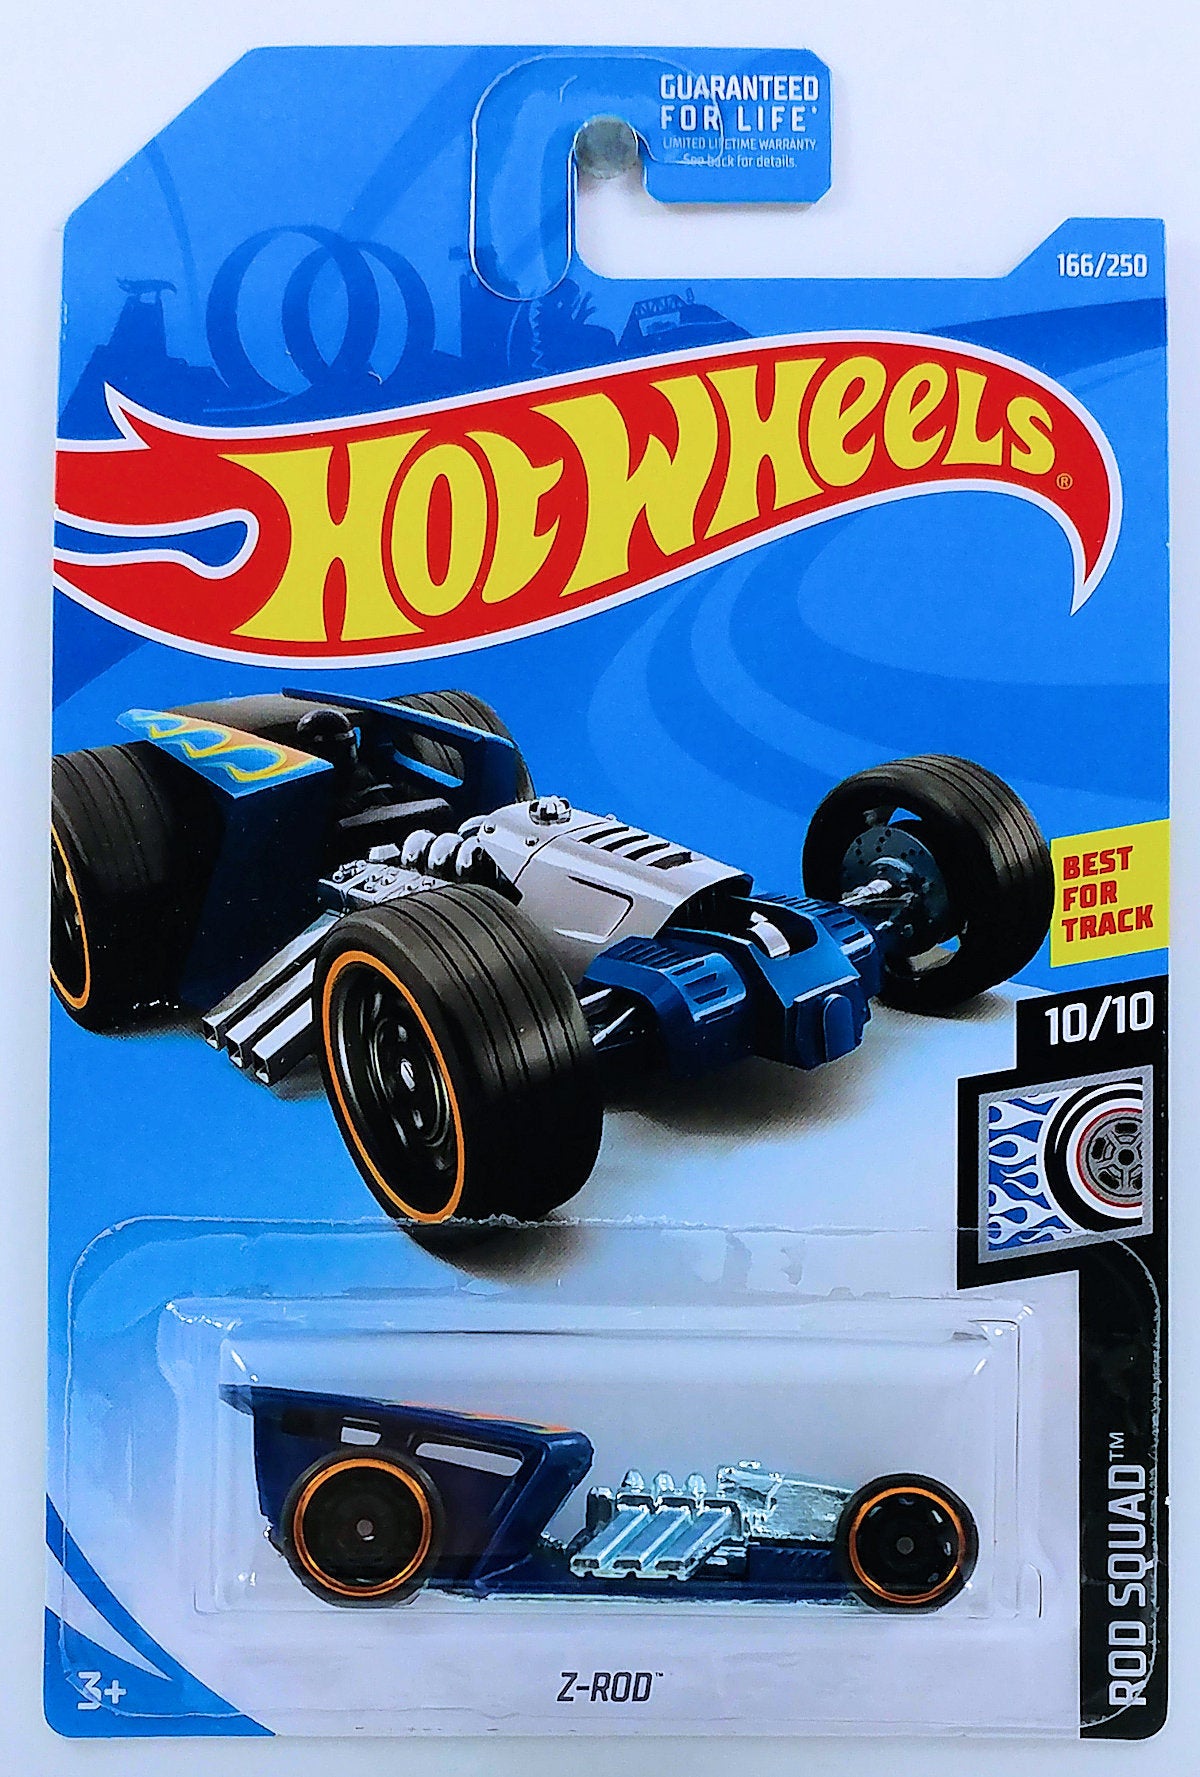 Hot Wheels 2019 - Collector # 166/250 - Rod Squad 10/10 - Z-Rod - Blue  - USA Card